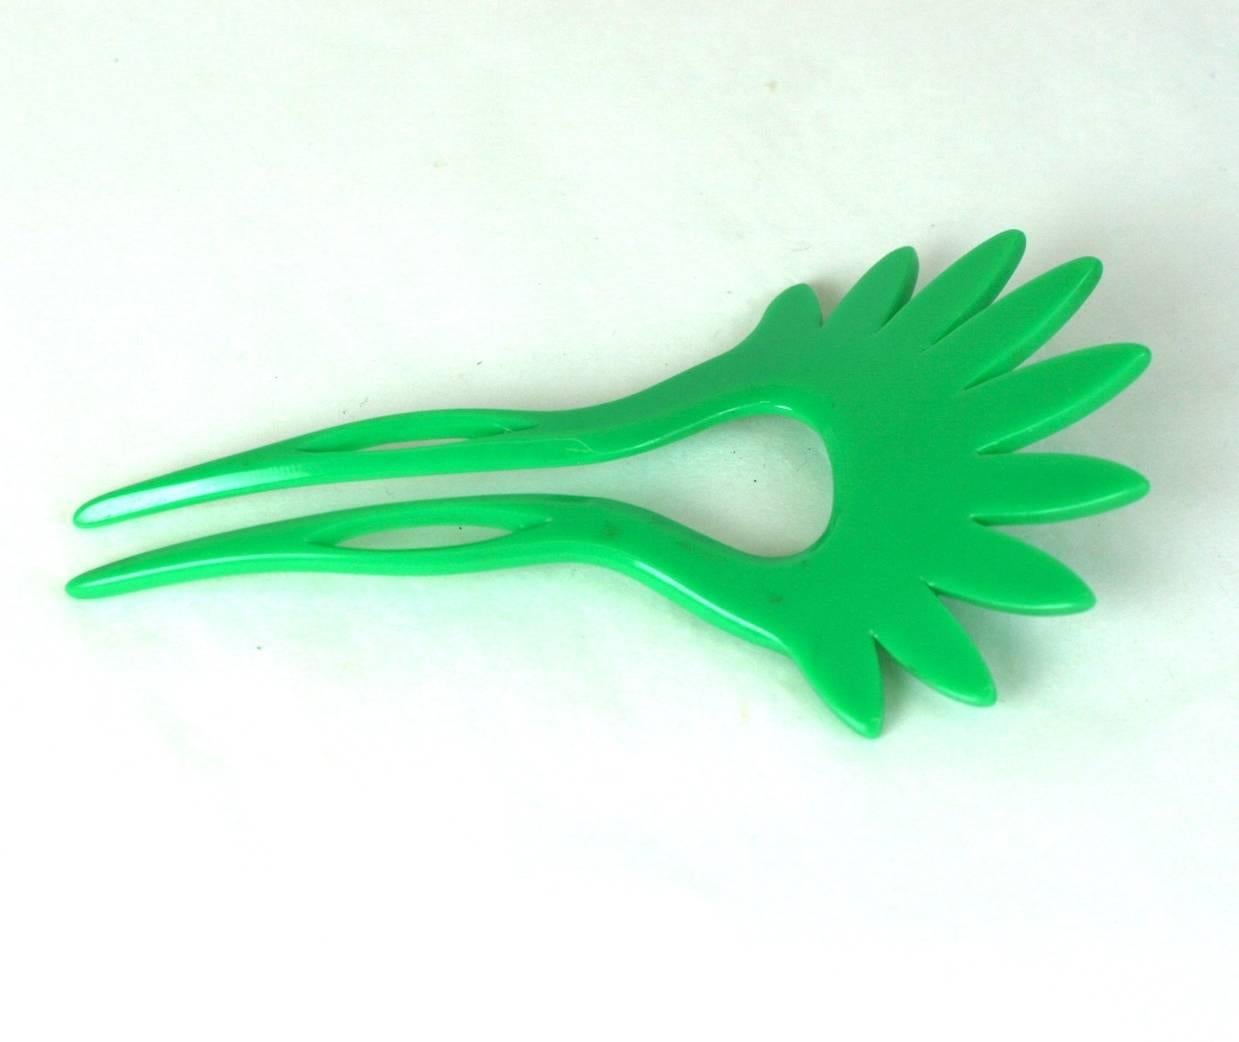 Yves Saint Laurent Galalith Chinese Collection vivid green hair comb. Designed by Roger Scemama for Yves Saint Laurent early 1970s.
Made in France. Signed.
Excellent Condition
Length 4.50